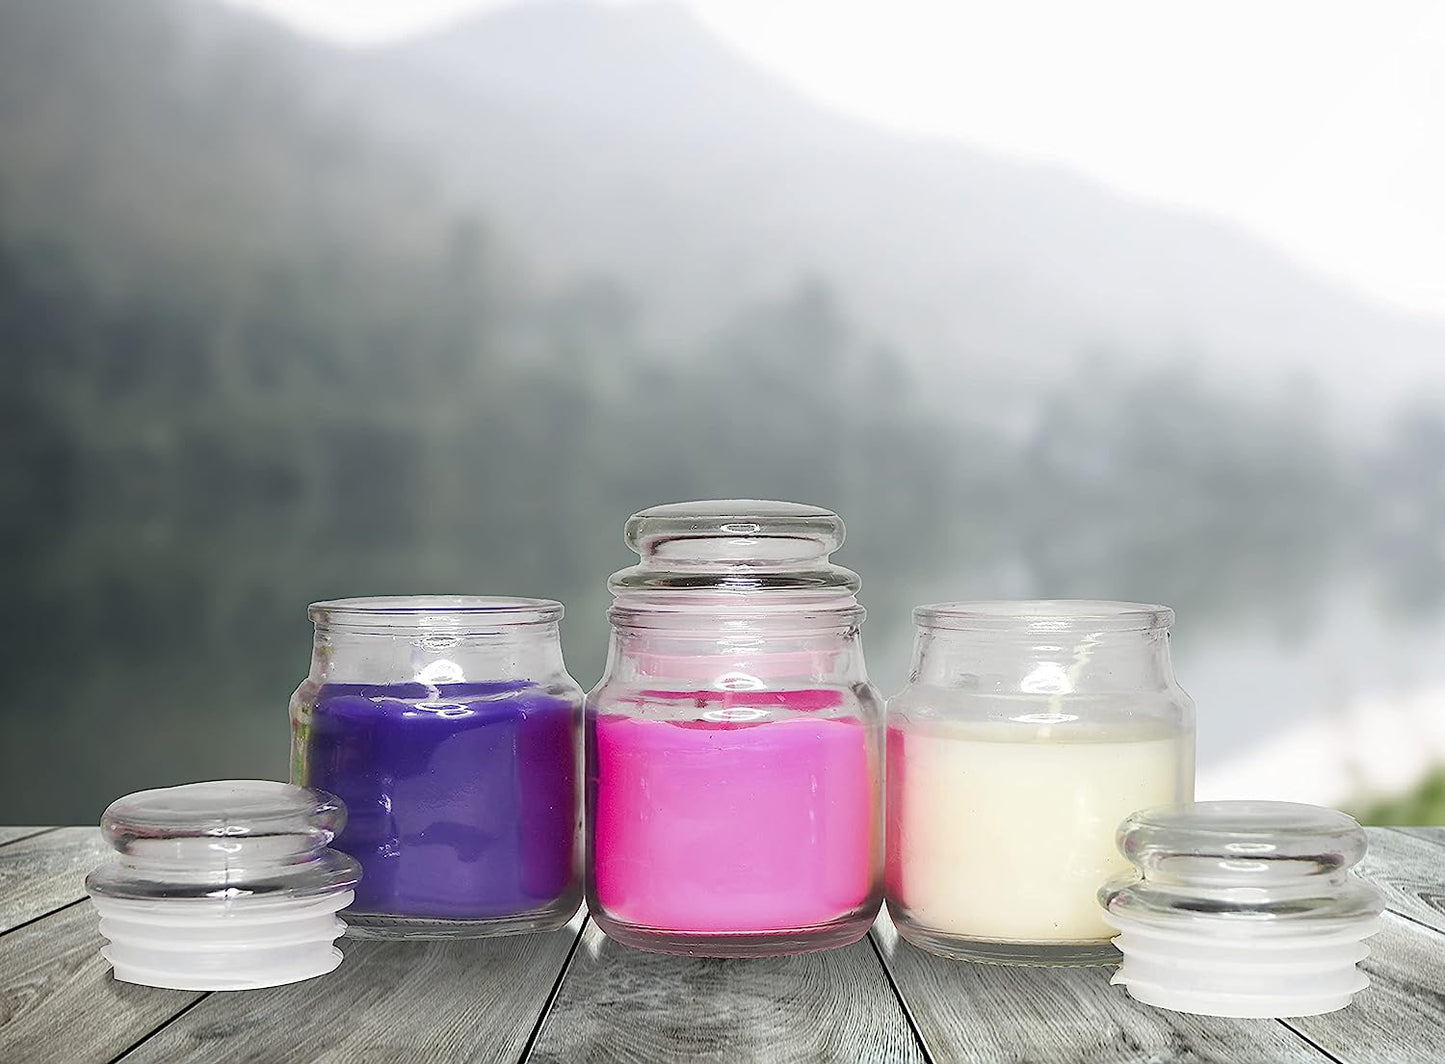 Paraffin Indian Scented Wax Jar Candle Set Pack of 3 (Lavender, Vanilla & Rose)